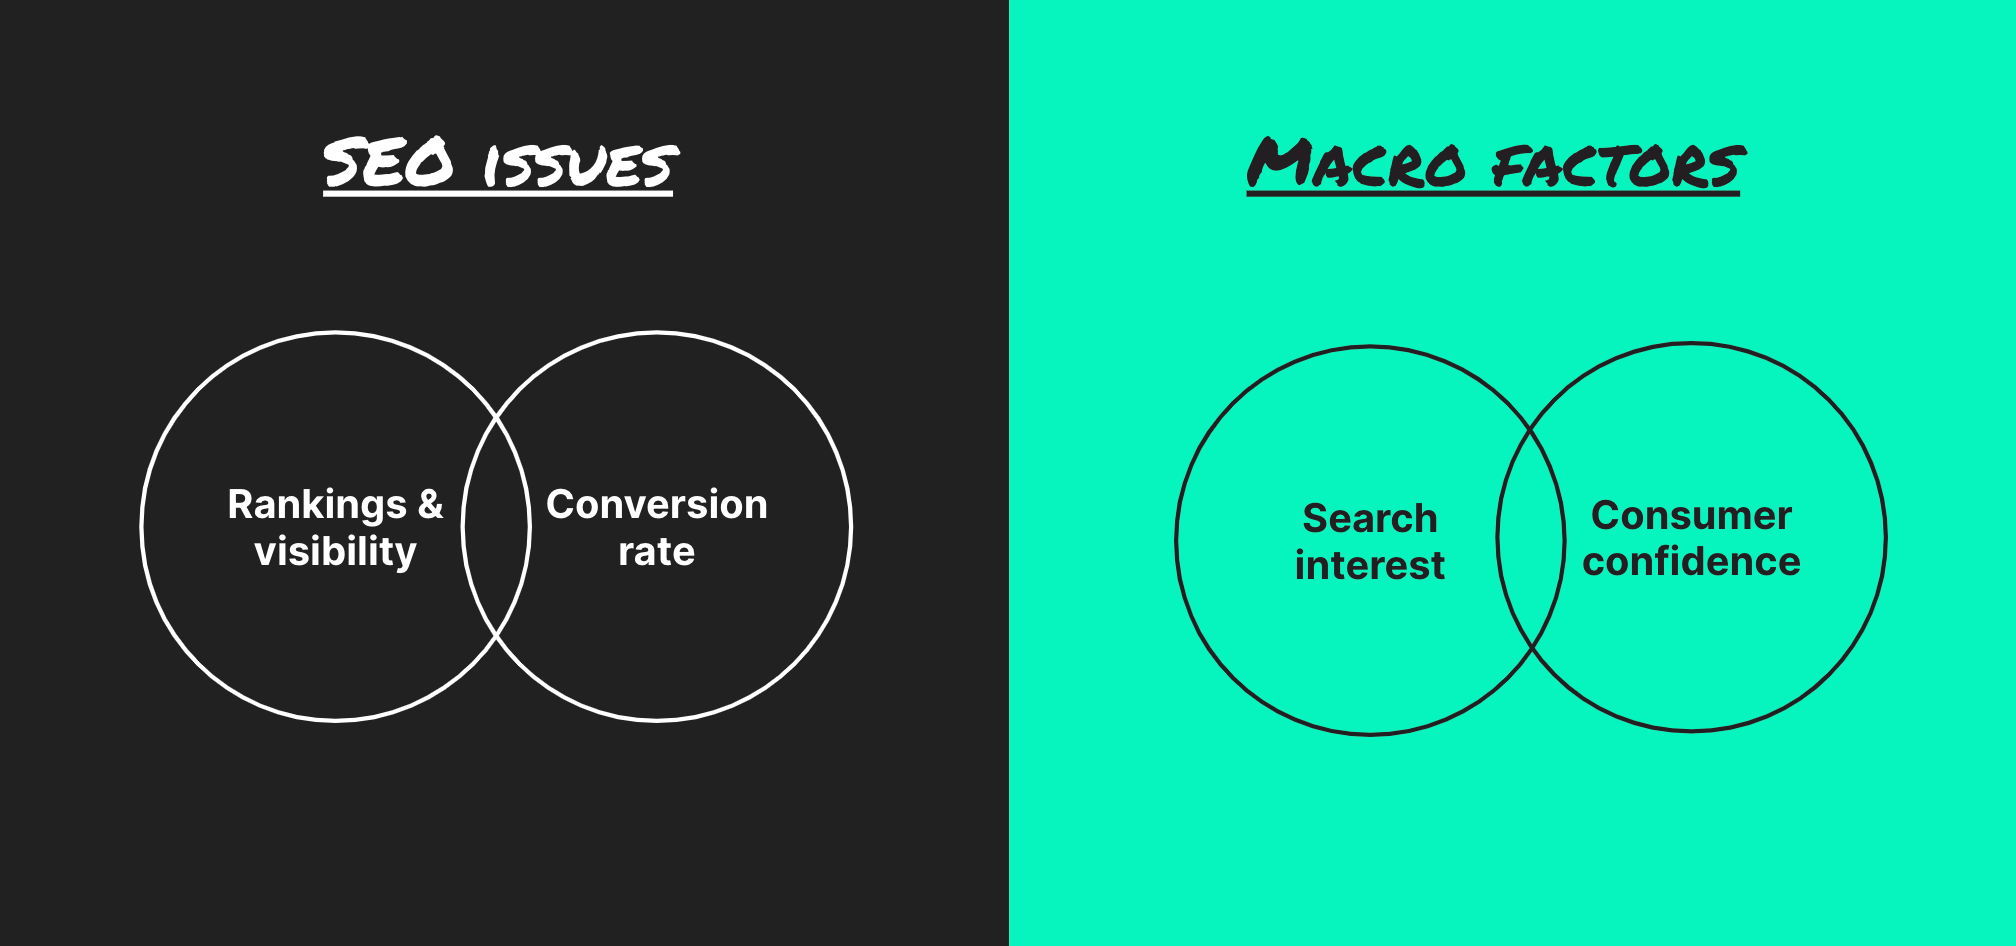 SEO issues: rankings and visibility and conversion rate vs Macro factors: search interest and consumer confidence